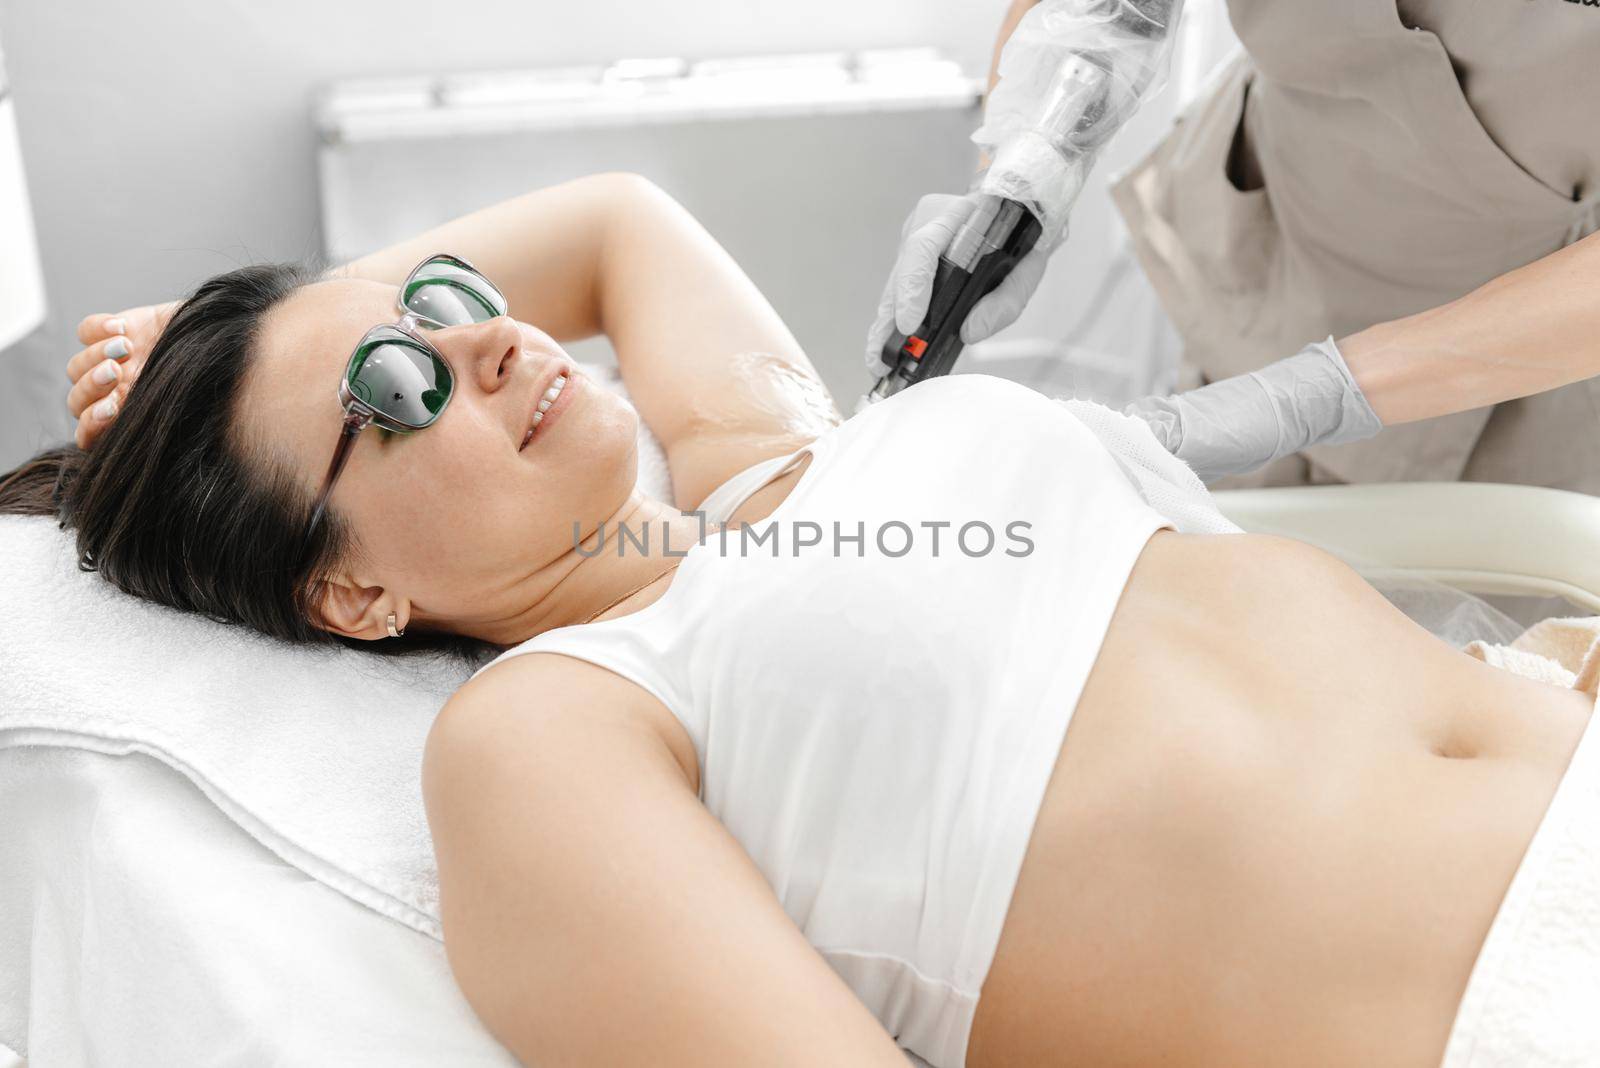 a girl lies on the laser hair removal during the procedure and smiles by gulyaevstudio